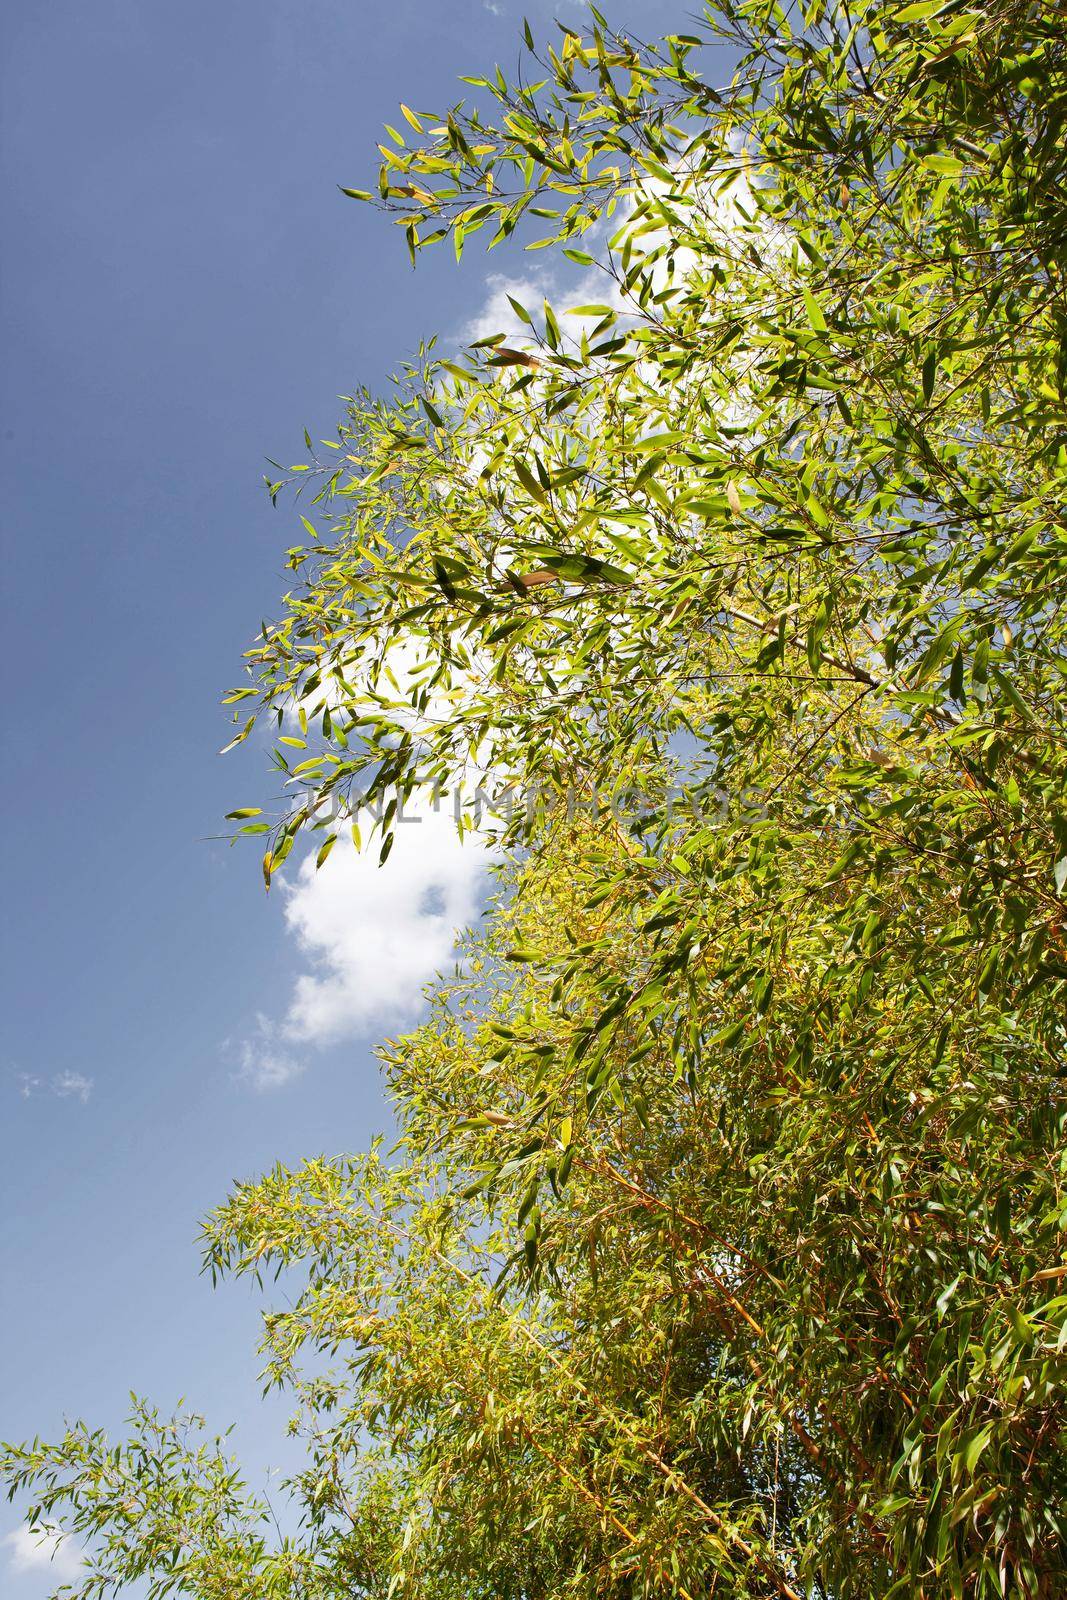 Bamboo forest and blue sky on background